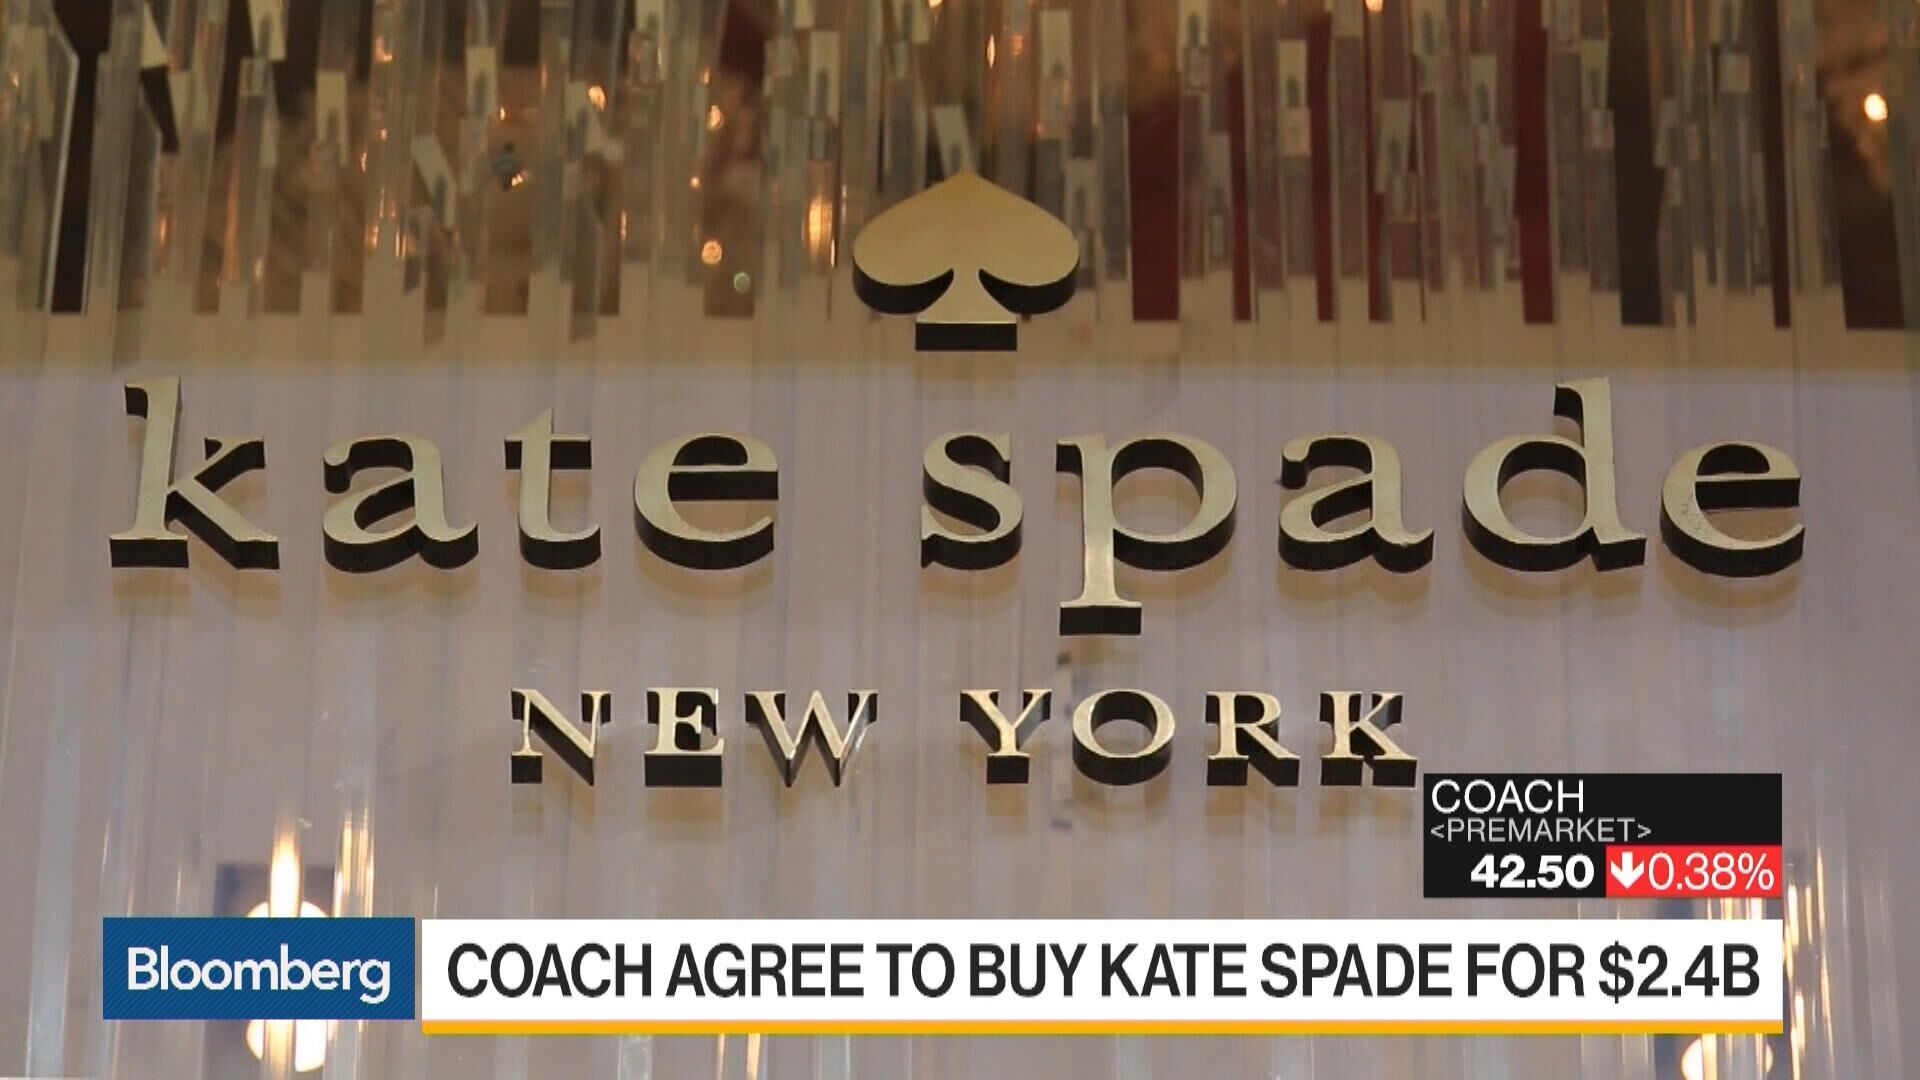 After eating Coach's lunch, Michael Kors, Kate Spade battle for